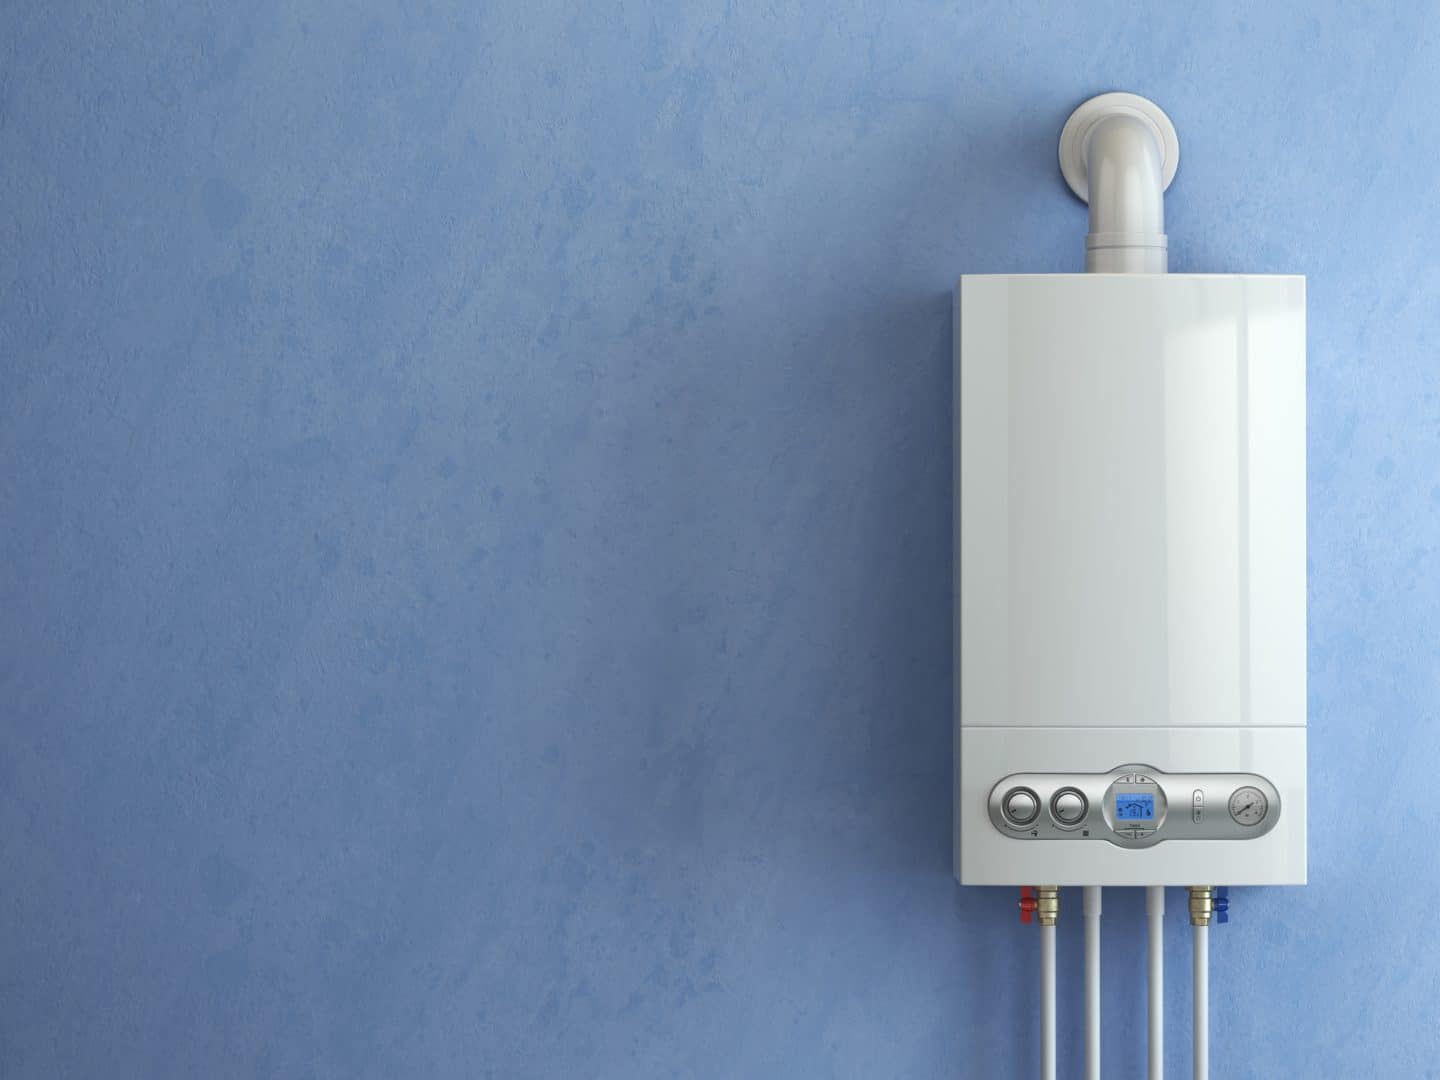 Everything You Need to Know About Water Heaters